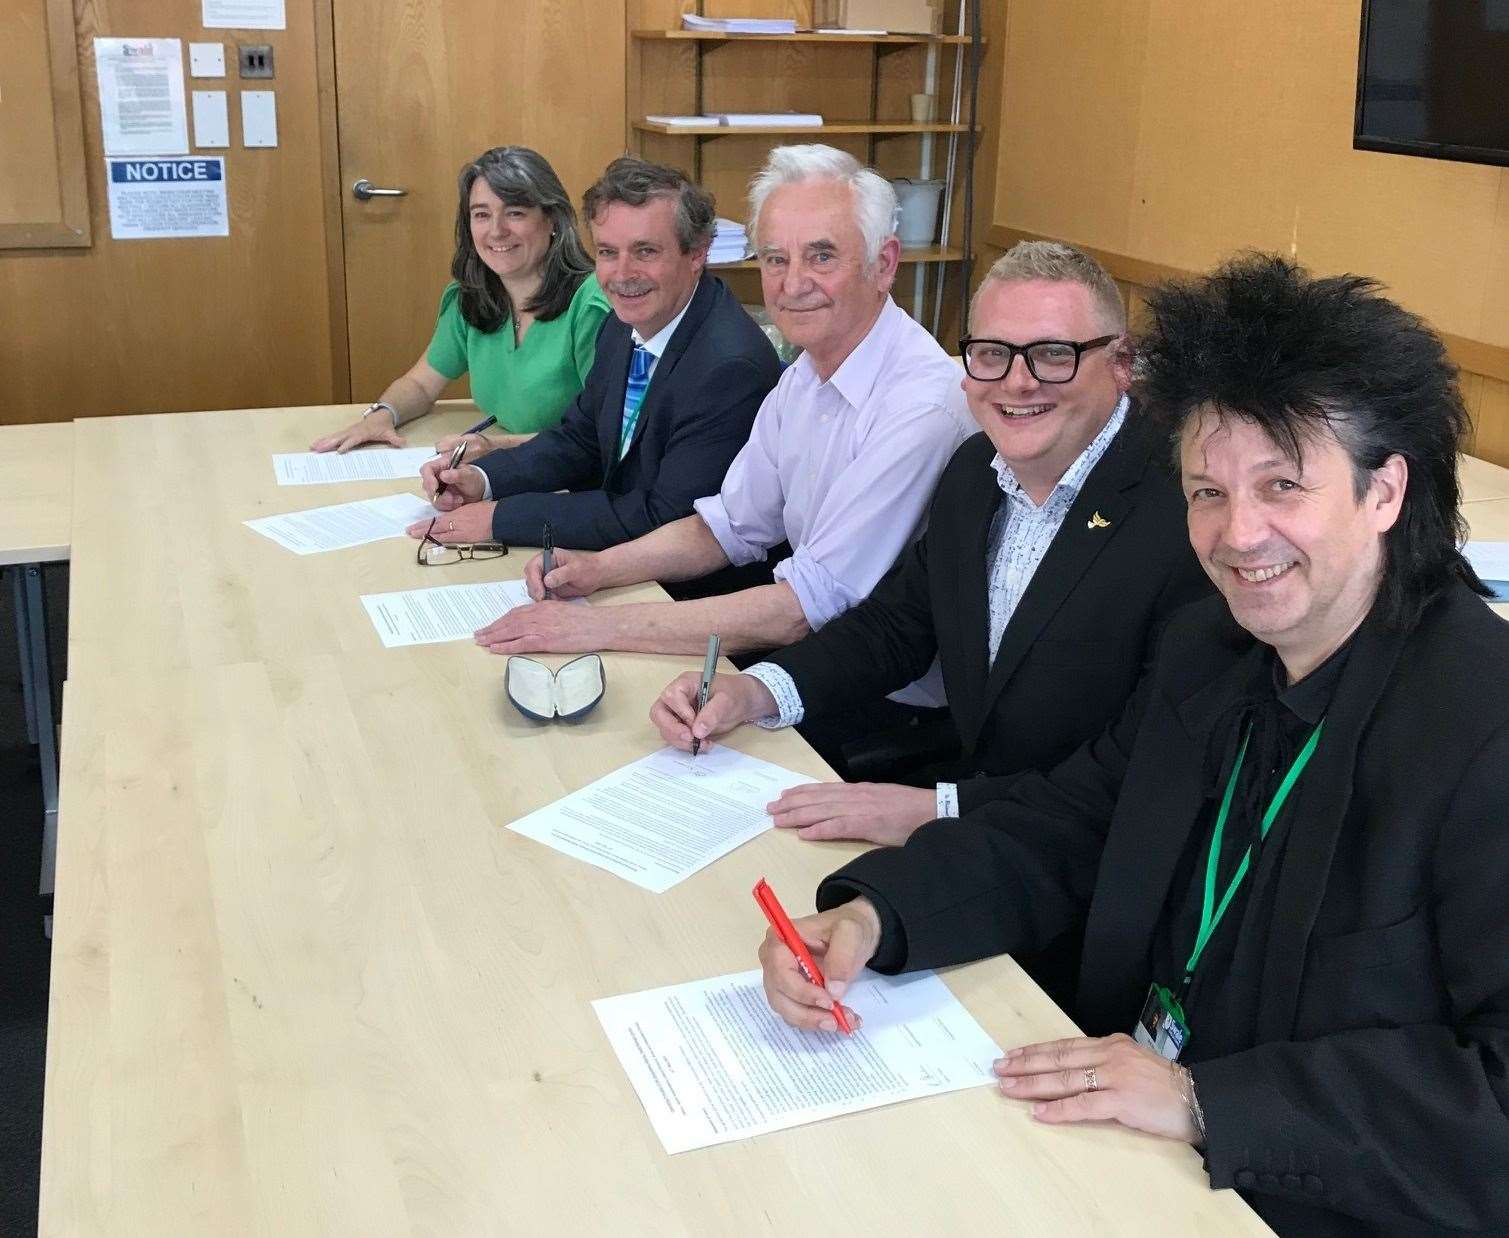 Swale Council's new Co-operative Alliance signing s a coalition agreement after ousting the Conservatives in May